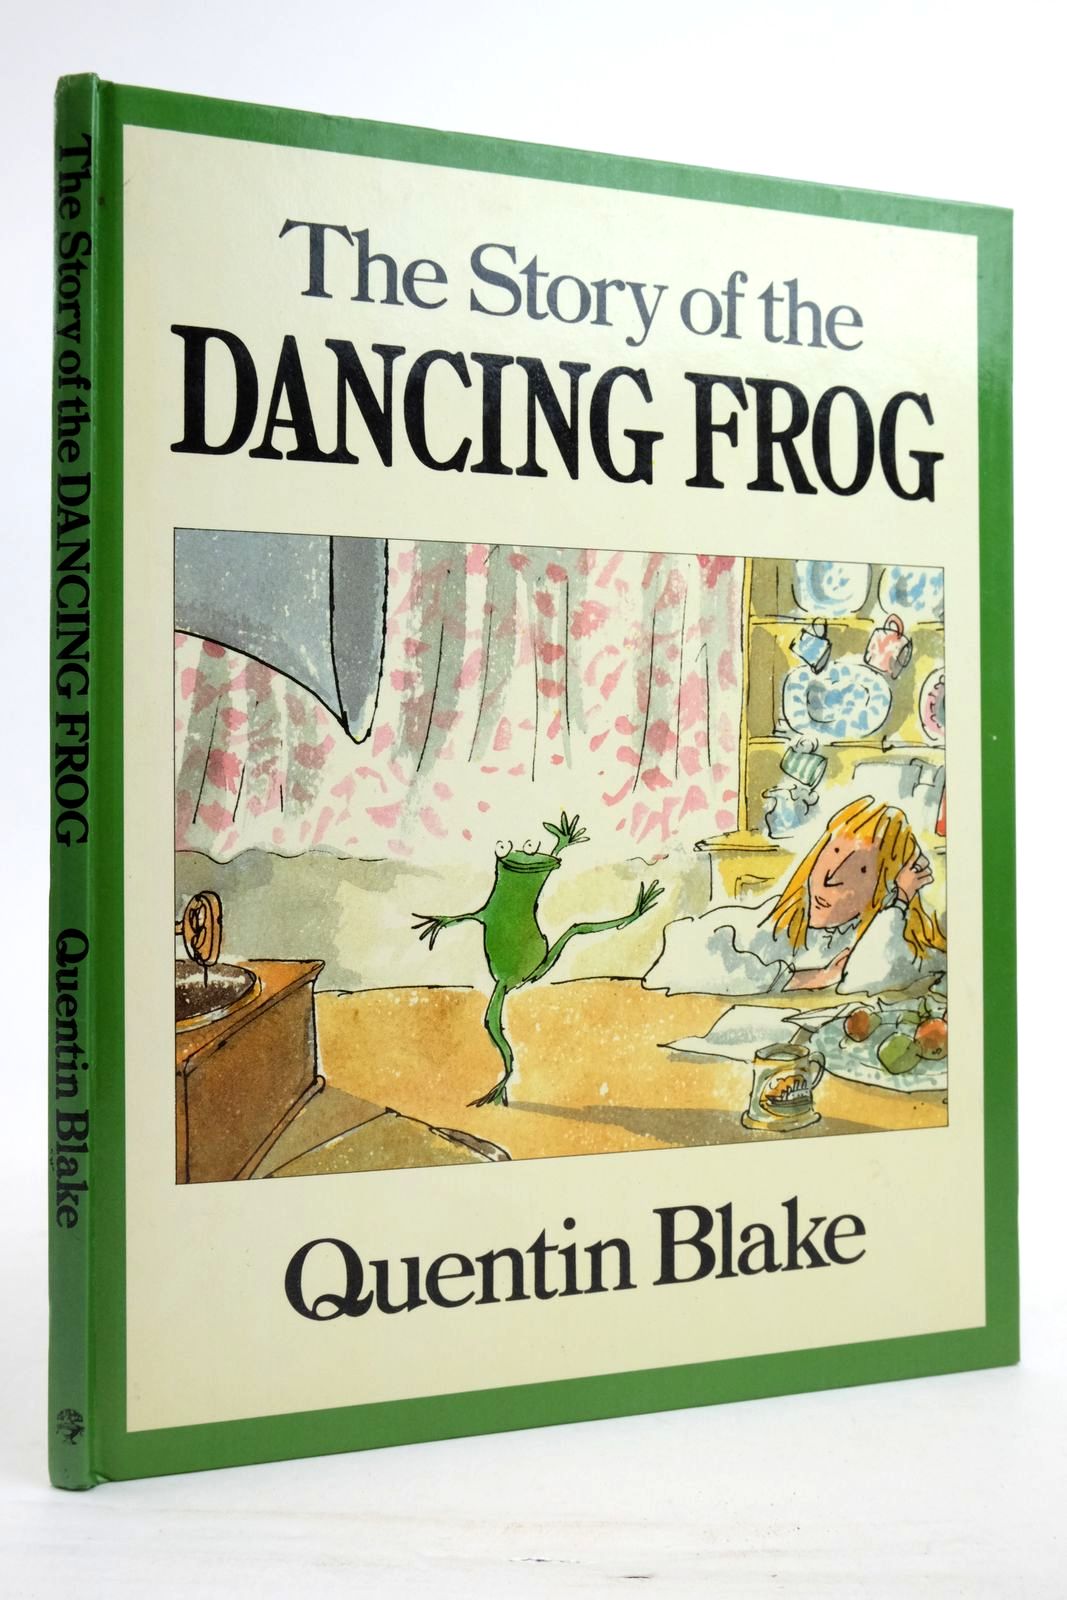 The Story of The Dancing Frog